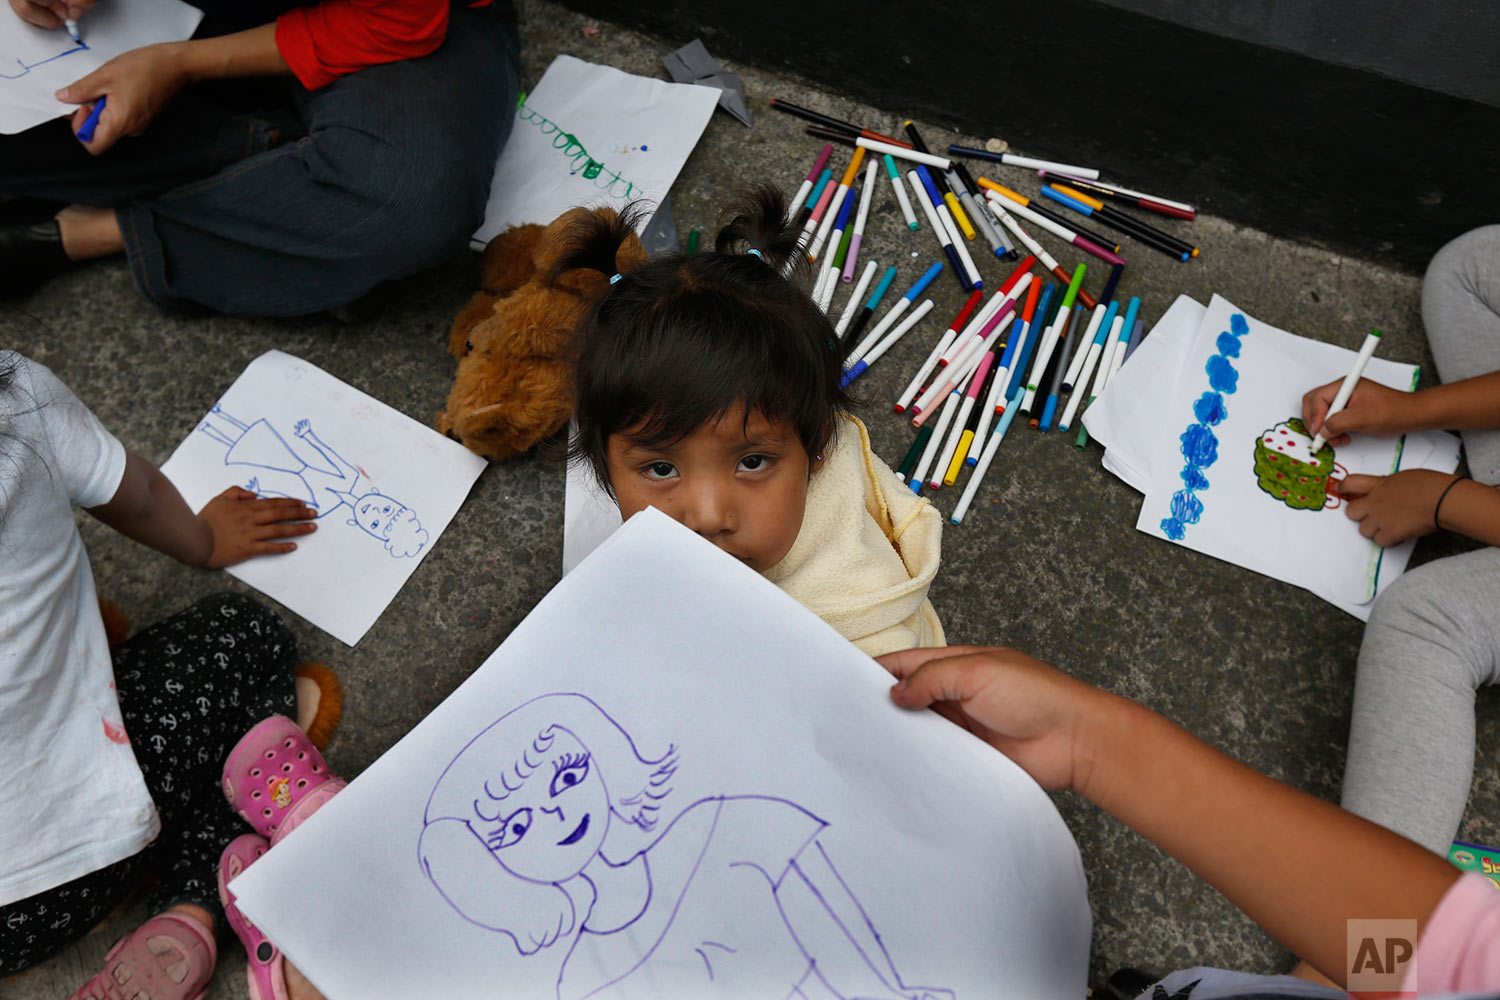 Children from an Otomi indigenous family pass the time drawing, on the sidewalk of their apartment building after it was declared uninhabitable by authorities after Tuesday's 7.1 earthquake, at the corner of Guanajuato and Monterrey streets in the Roma neighborhood of Mexico City, Saturday, Sept. 23, 2017. (AP Photo/Marco Ugarte)